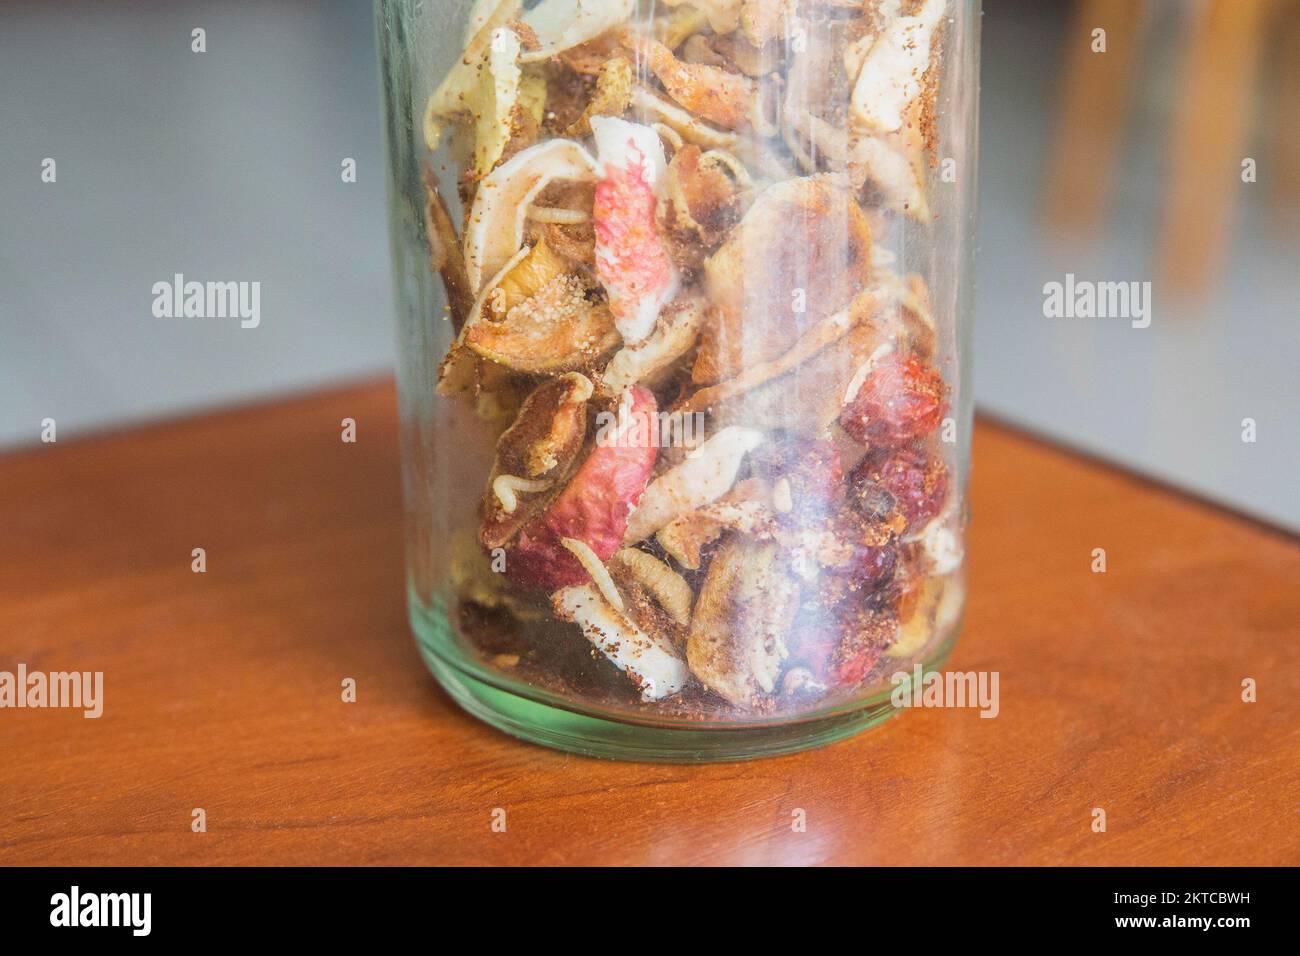 Jar of dried fruits that worms eat Stock Photo